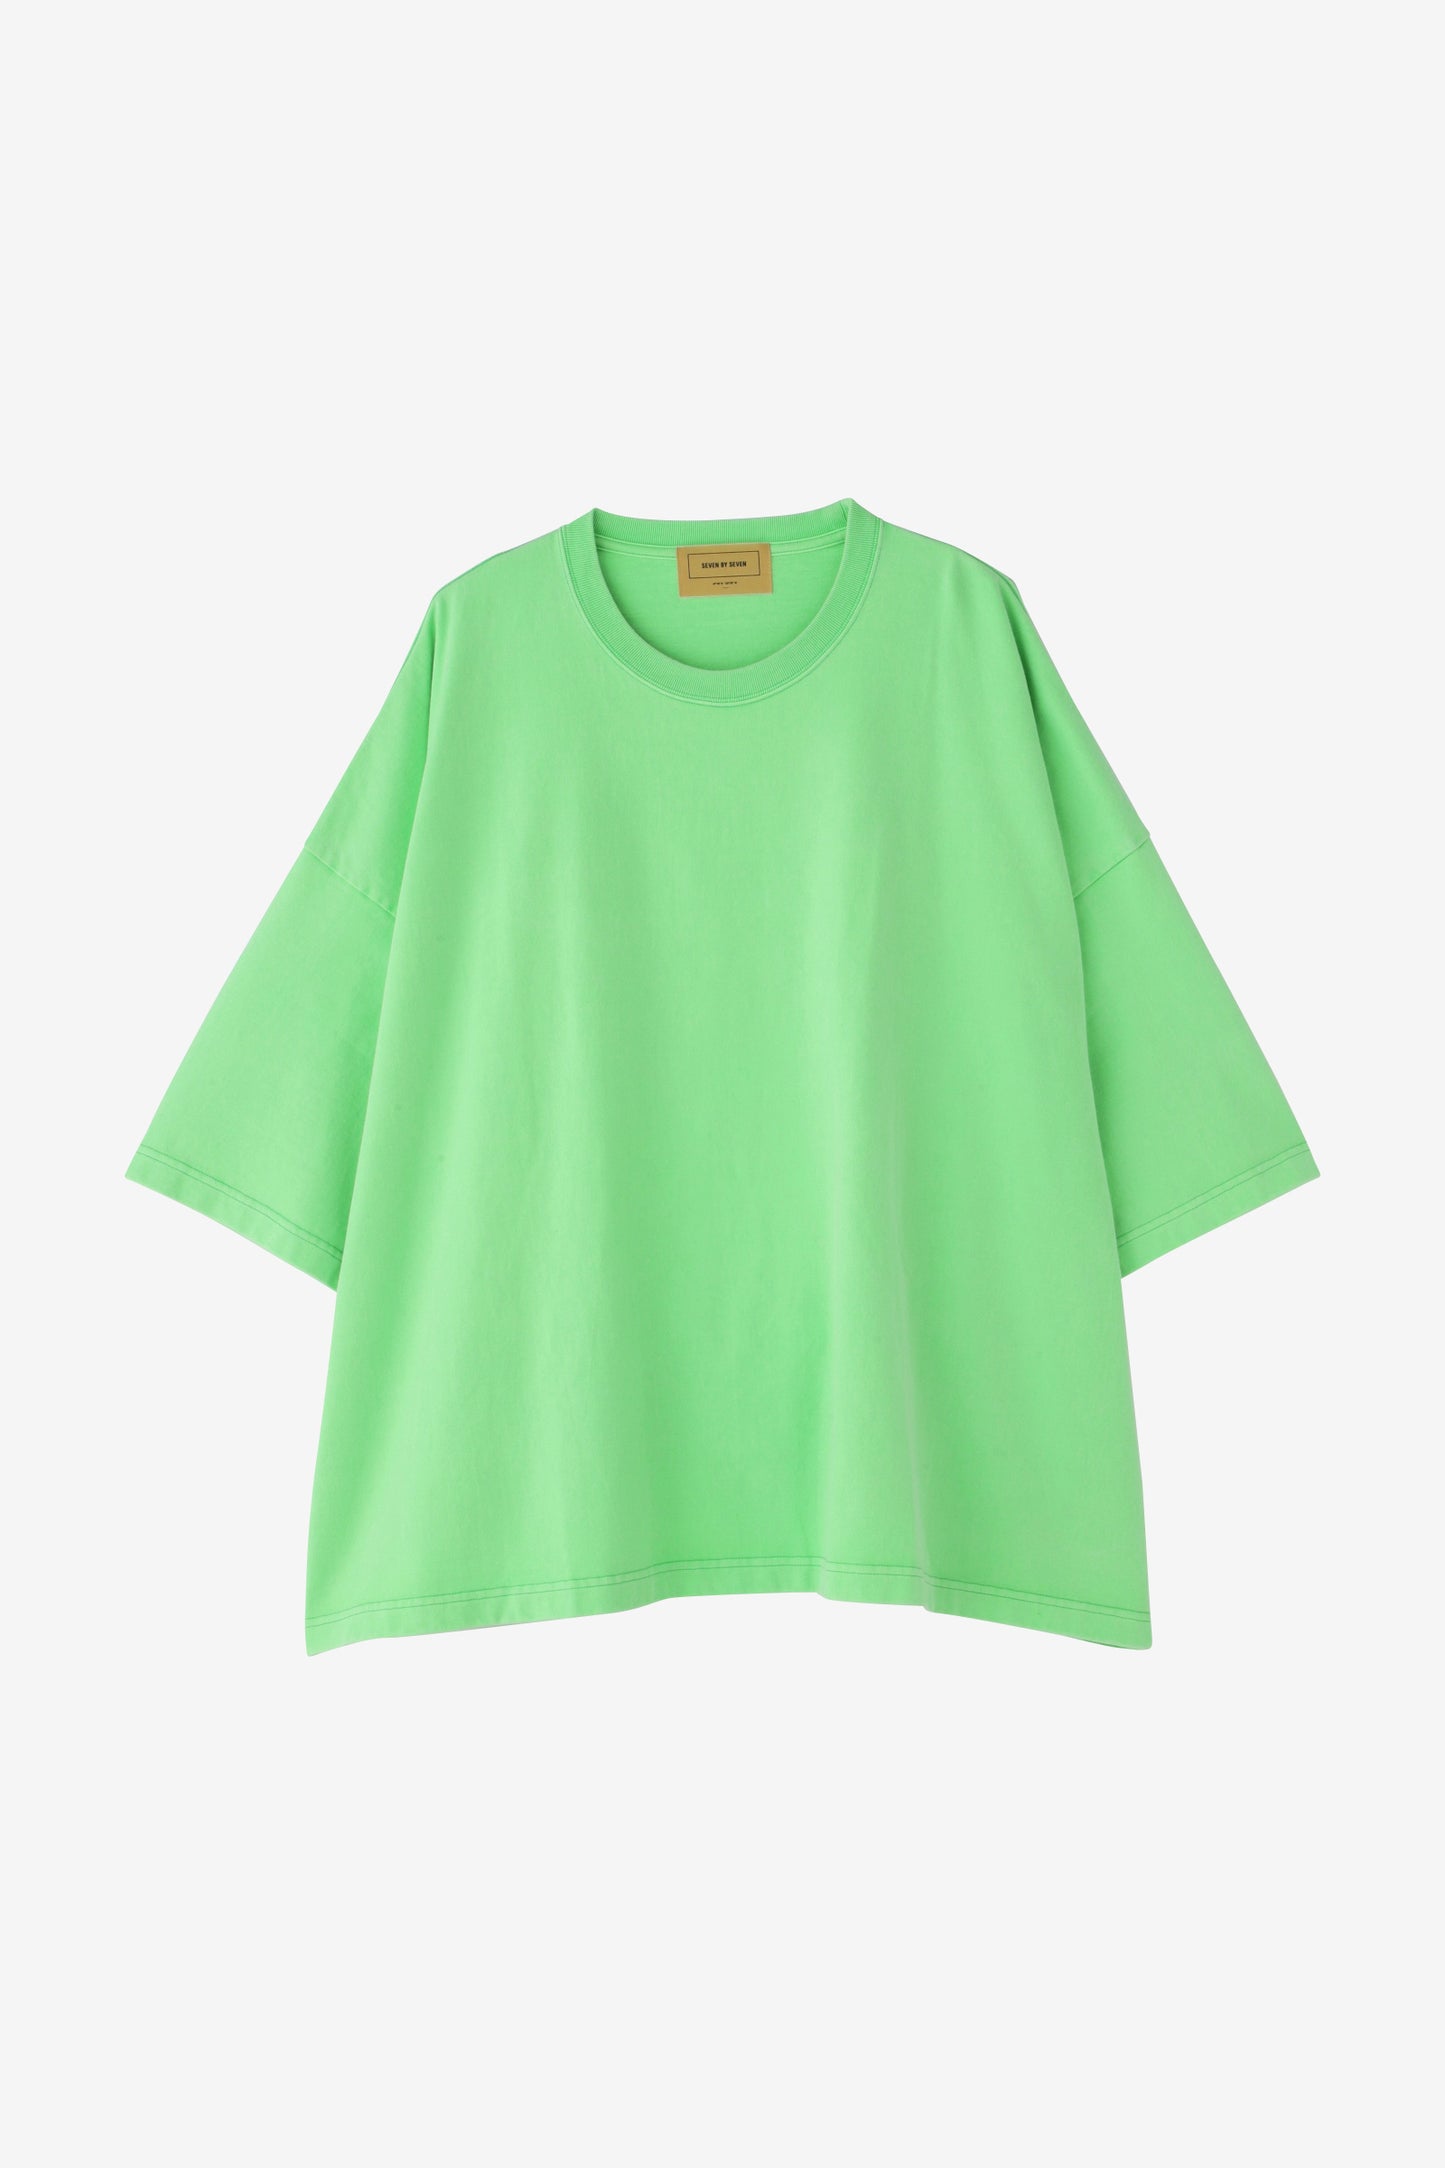 HEAVY WEIGHT BIG TEE - Pigment dyed -